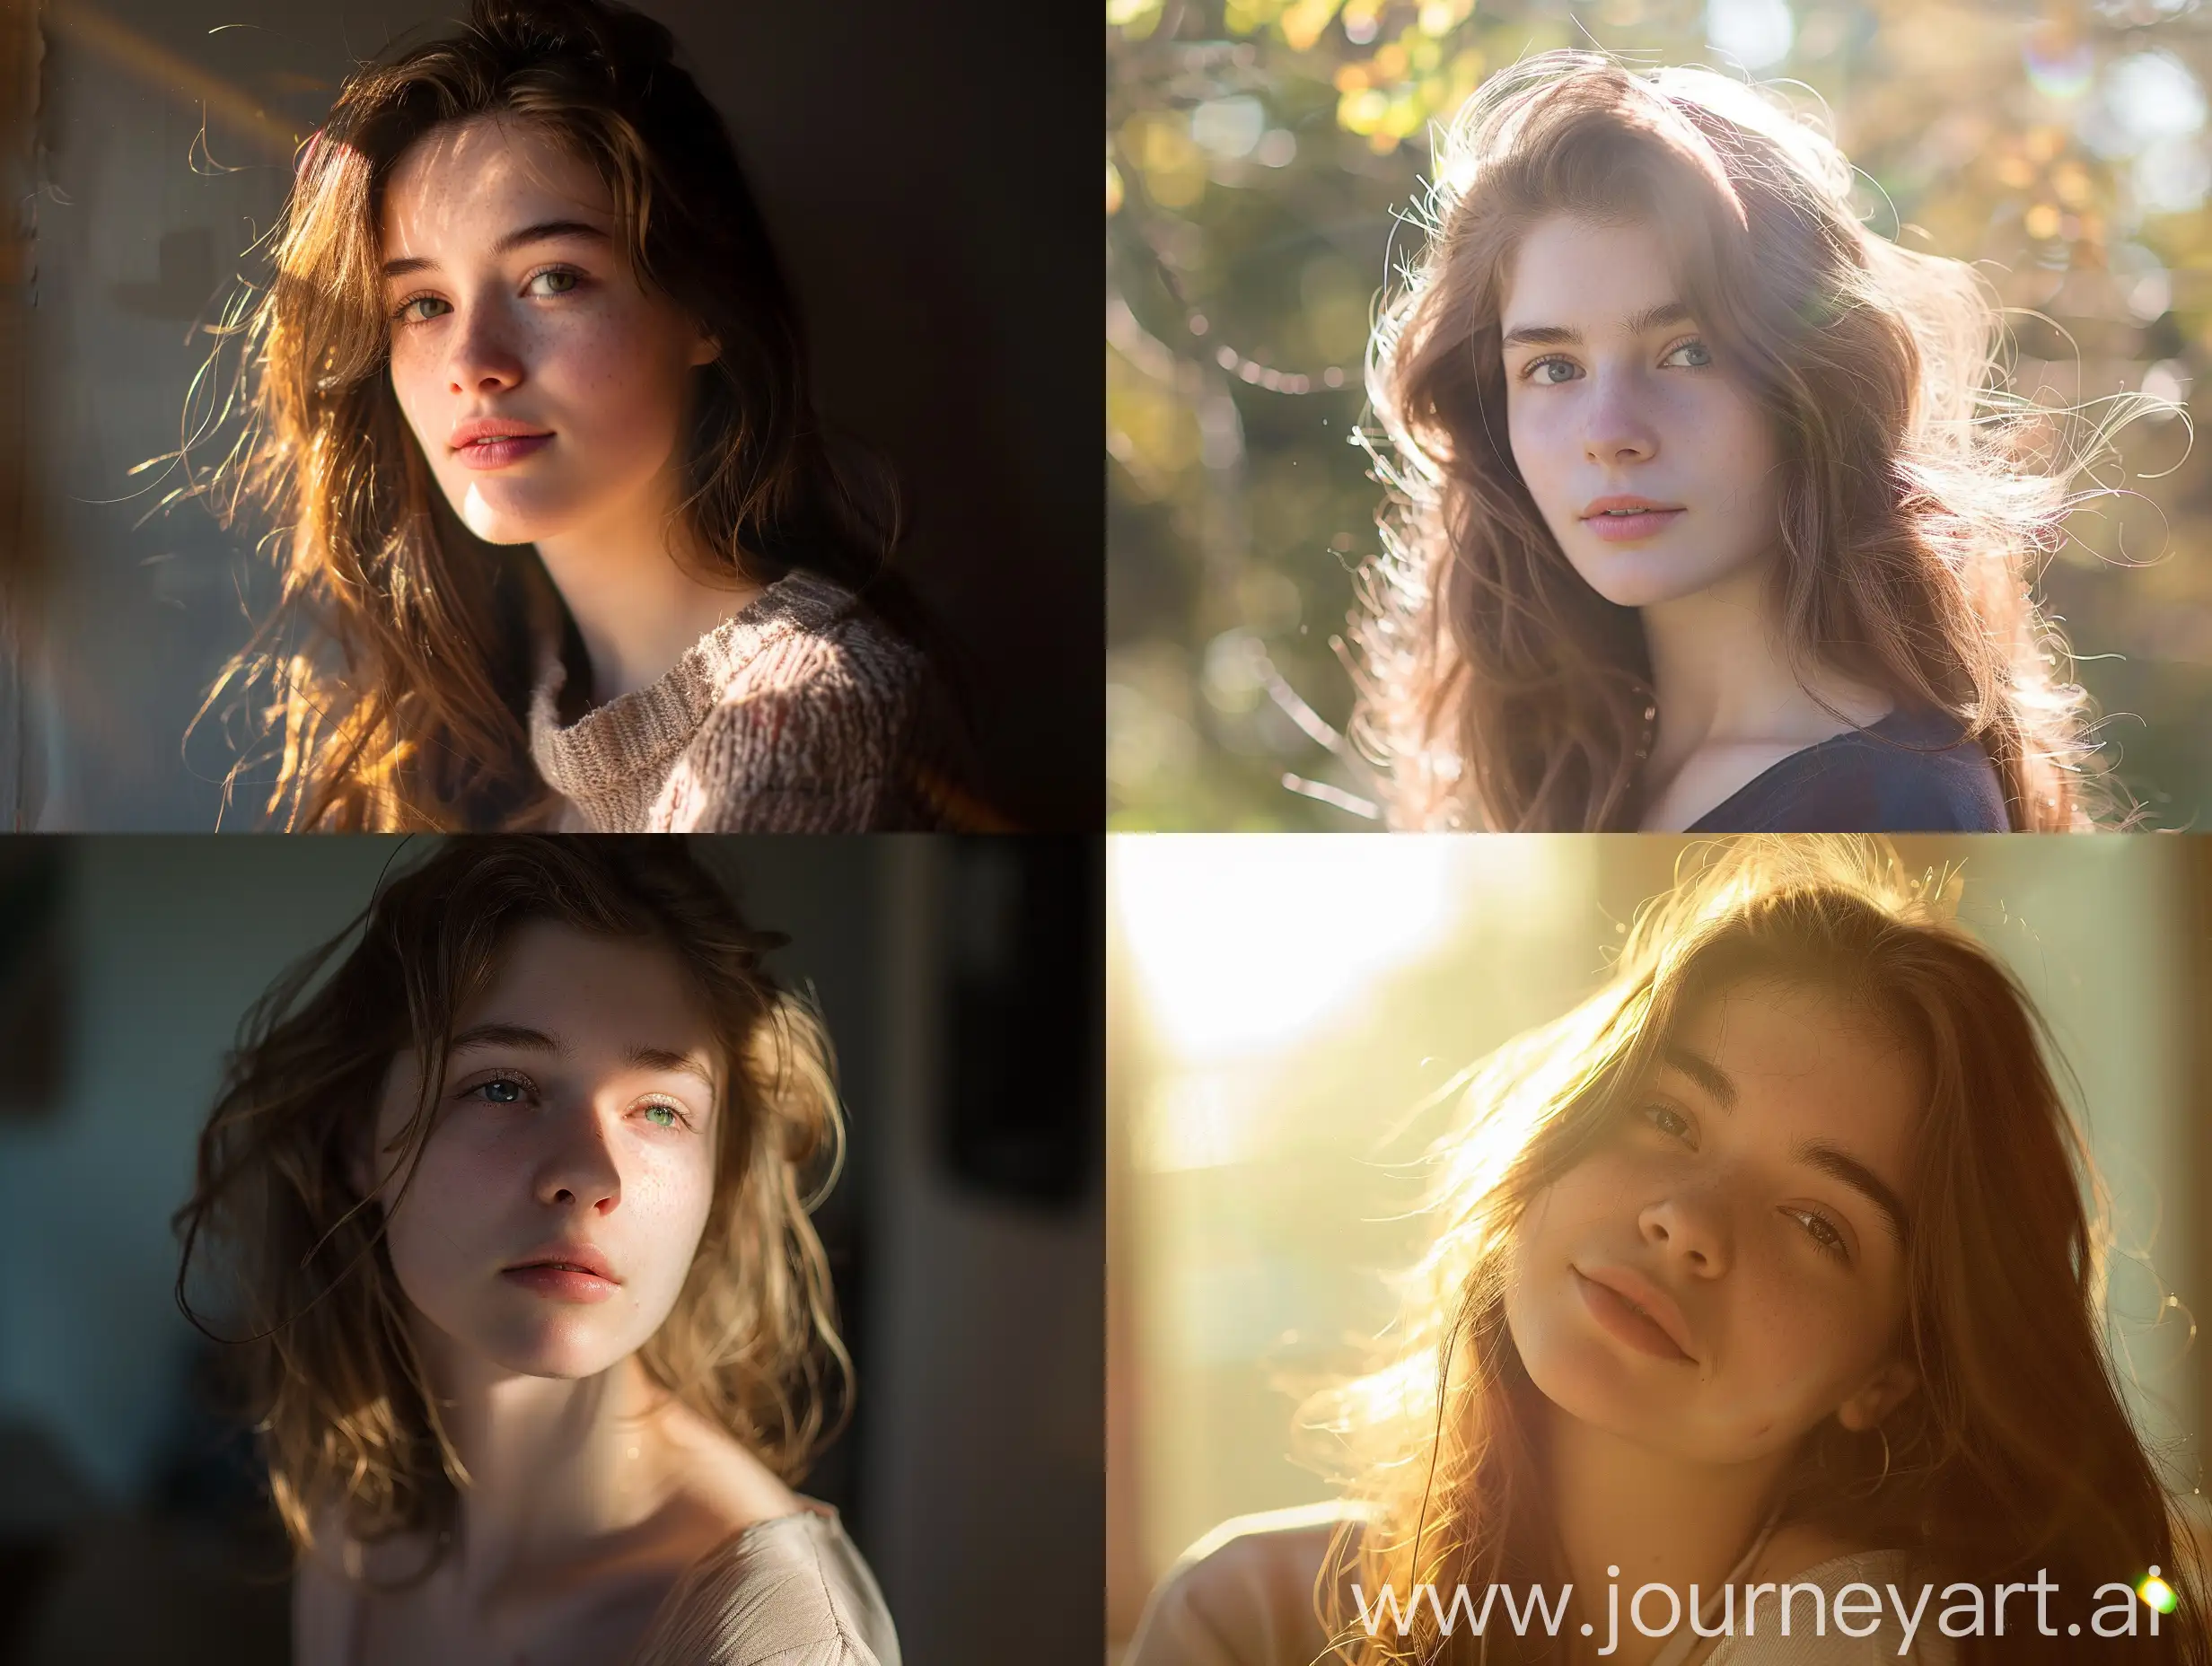 Dreamy-Candid-Portrait-Photography-of-a-Young-Woman-with-Sunlight-in-Her-Hair